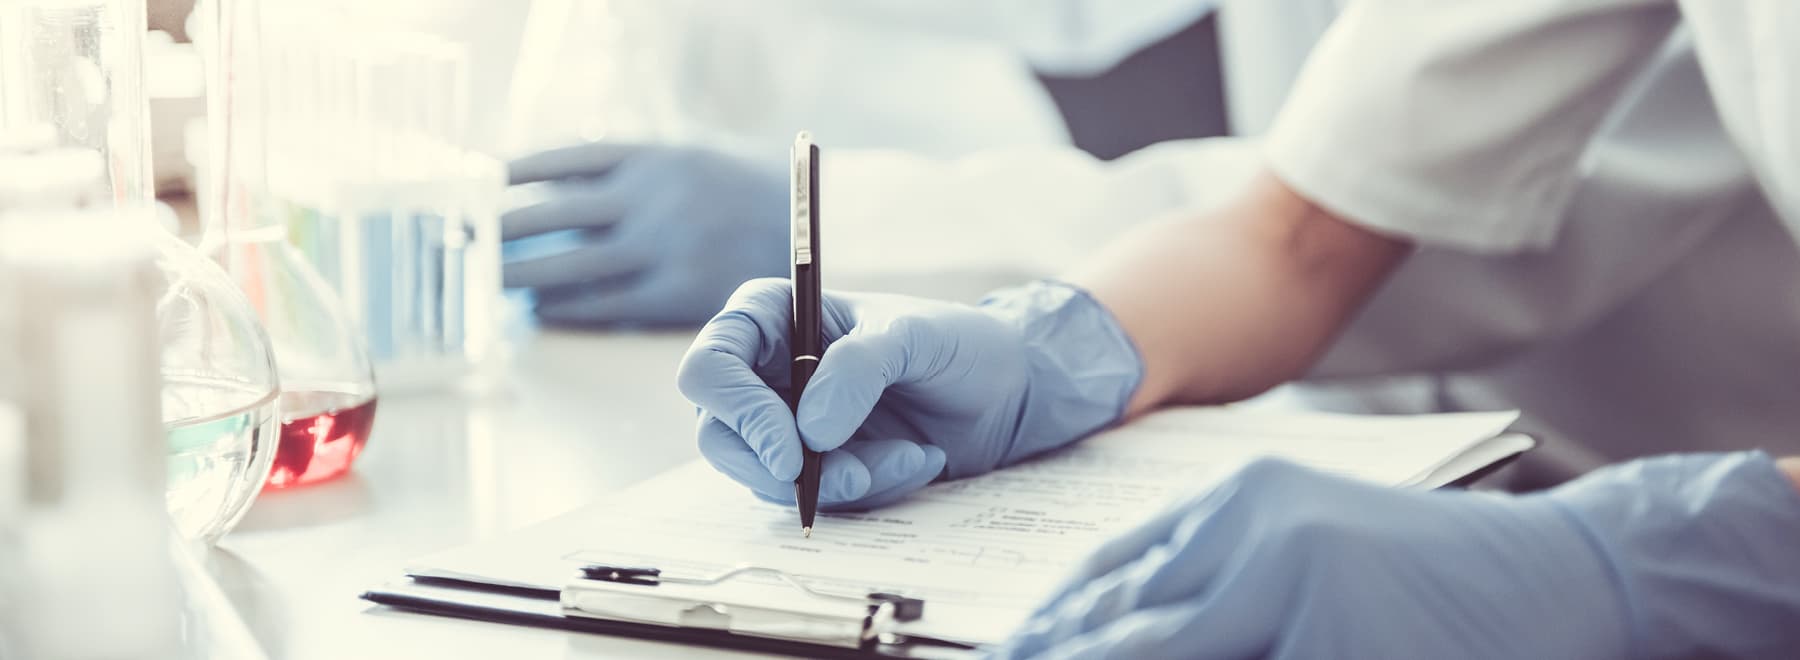 Close-up of a health care provider's arm making notes on a clipboard.